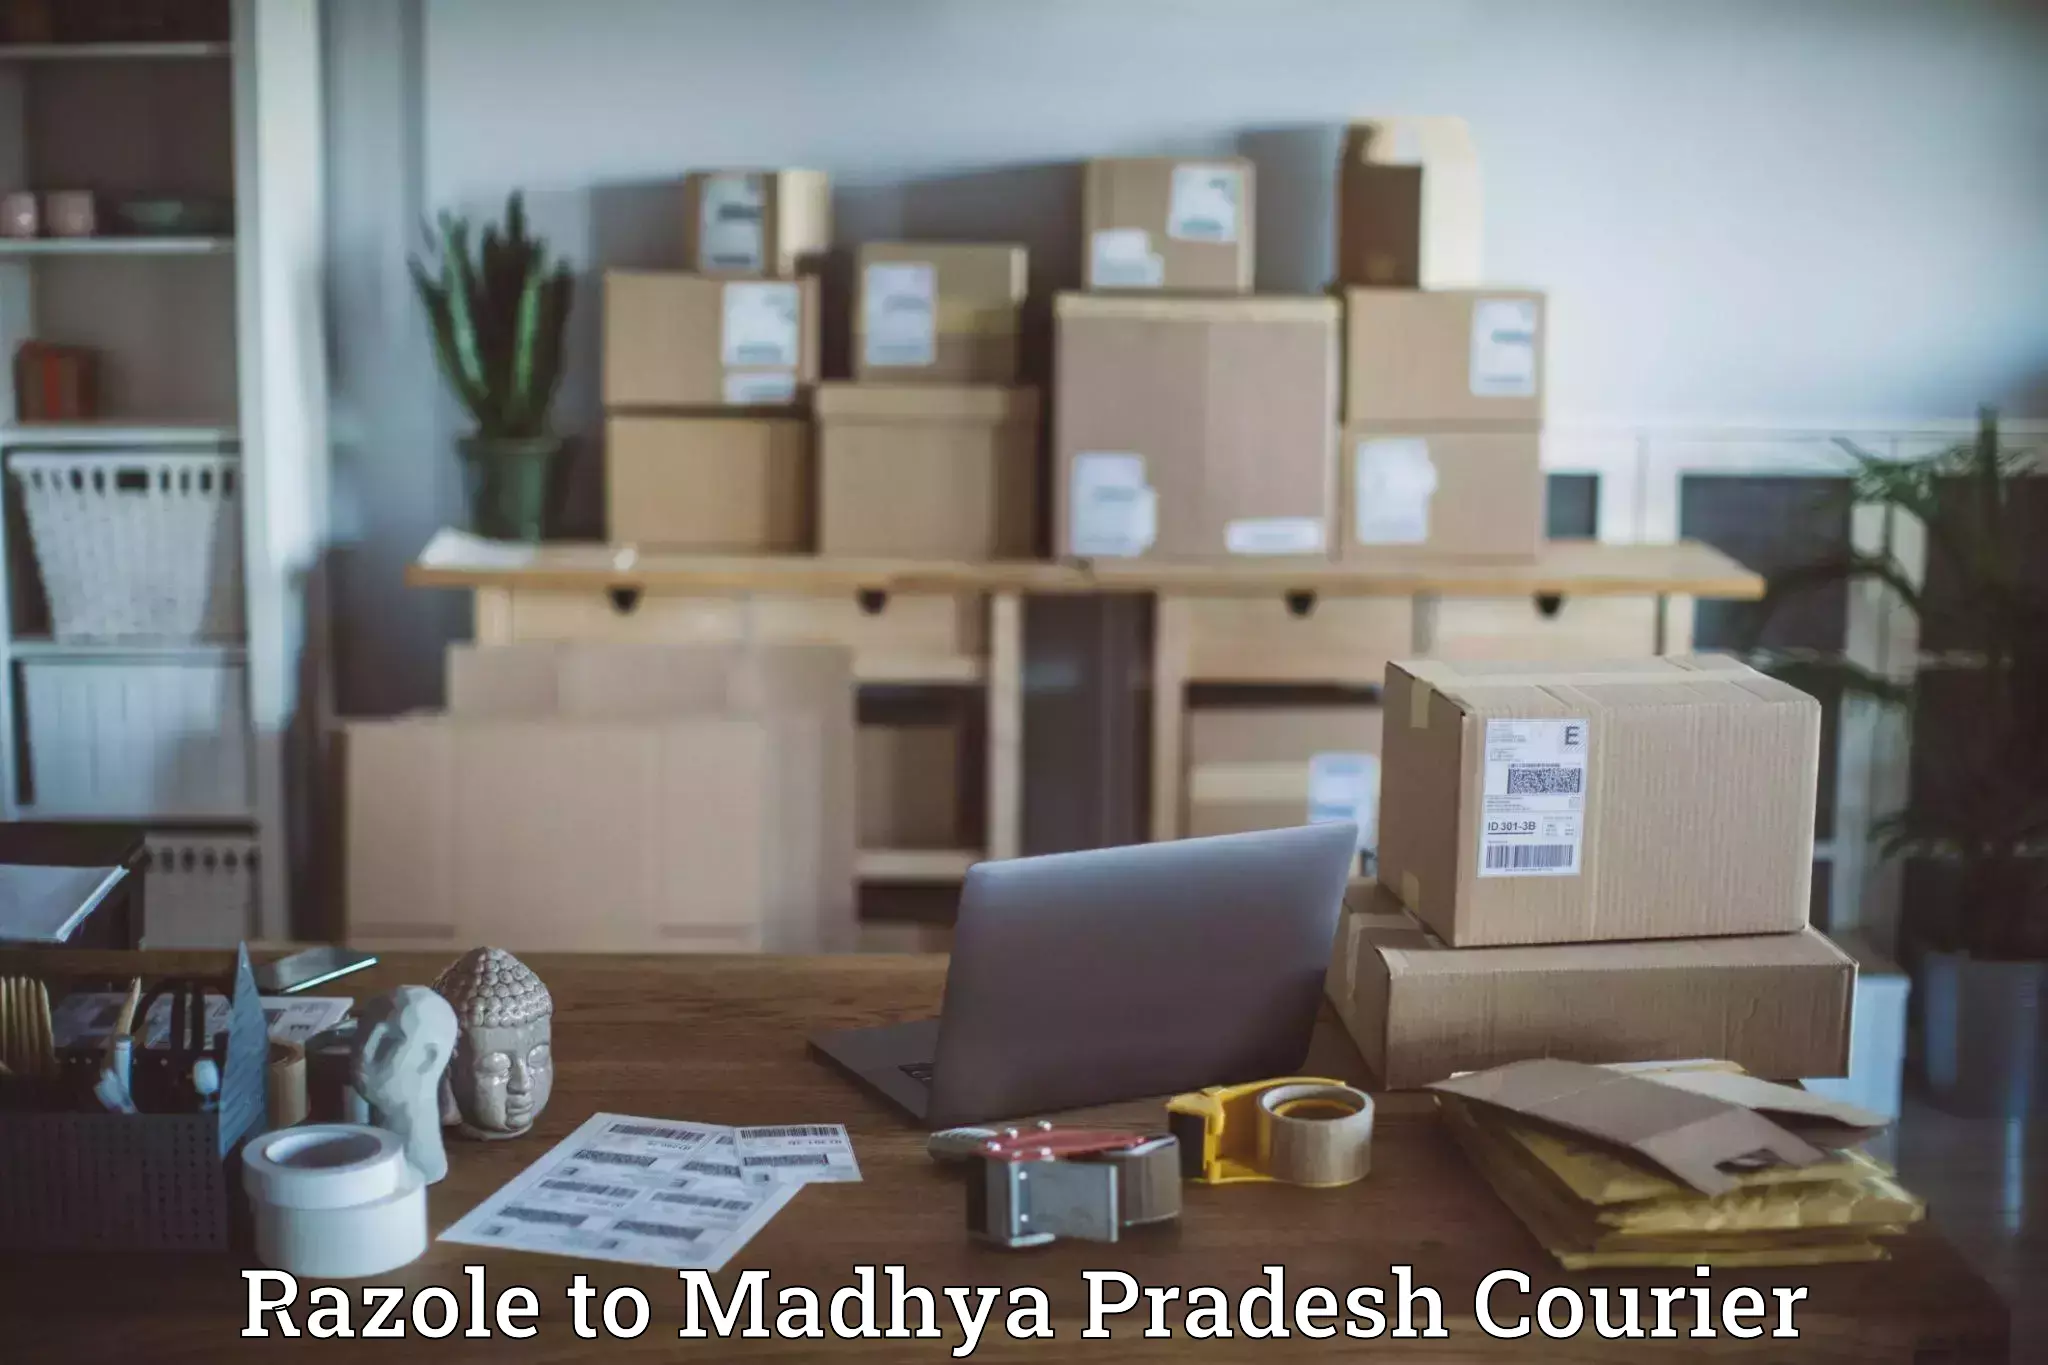 Ocean freight courier Razole to IIIT Bhopal